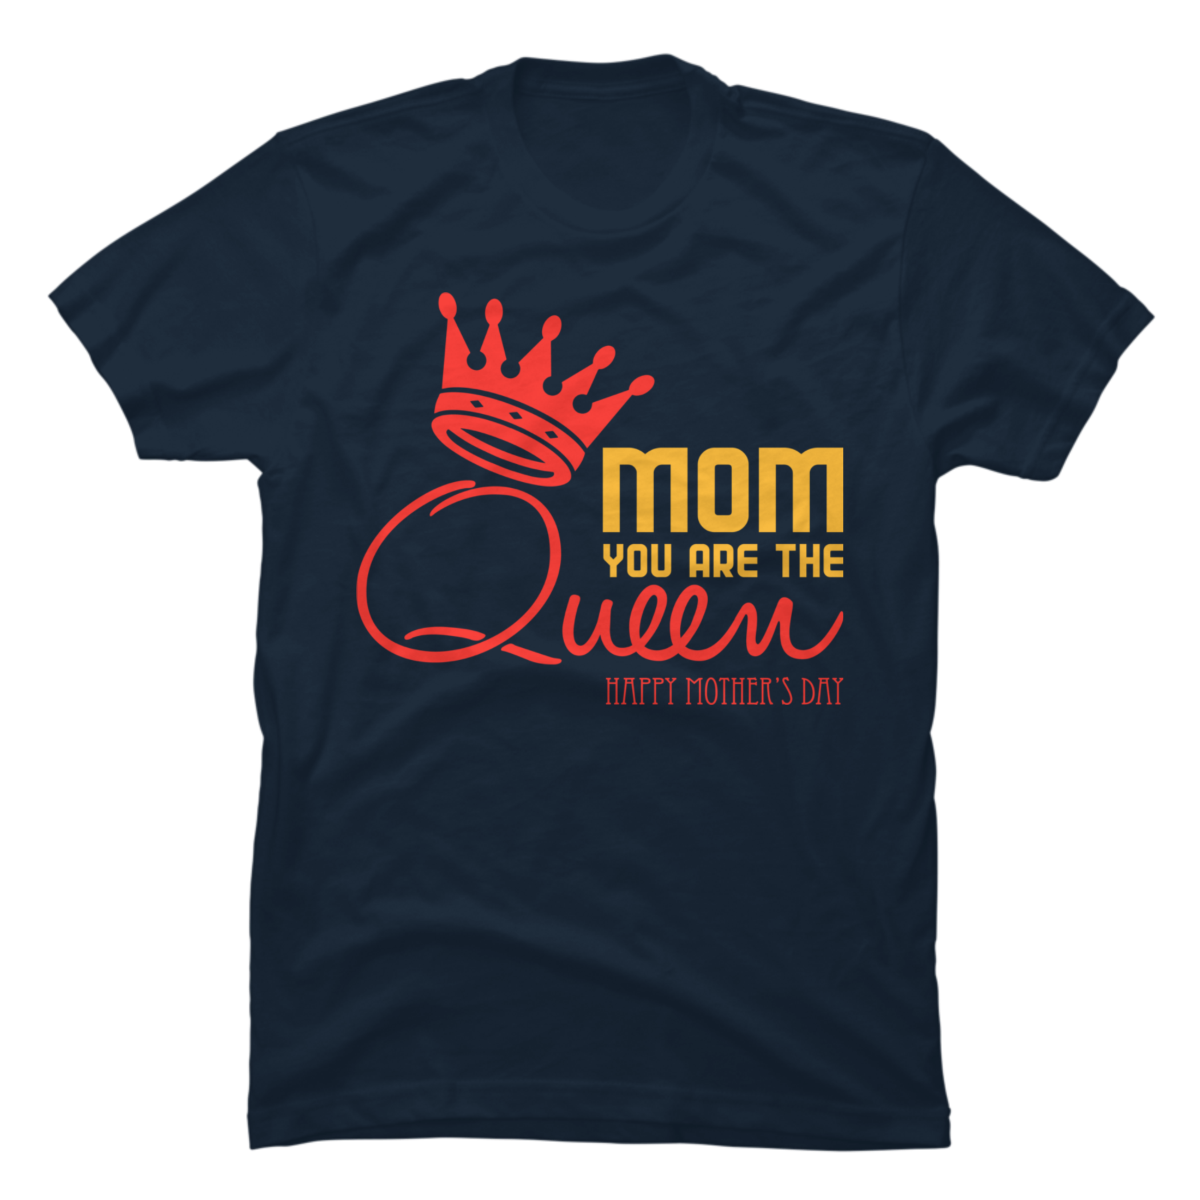 Mom You Are The Queen Buy T Shirt Designs